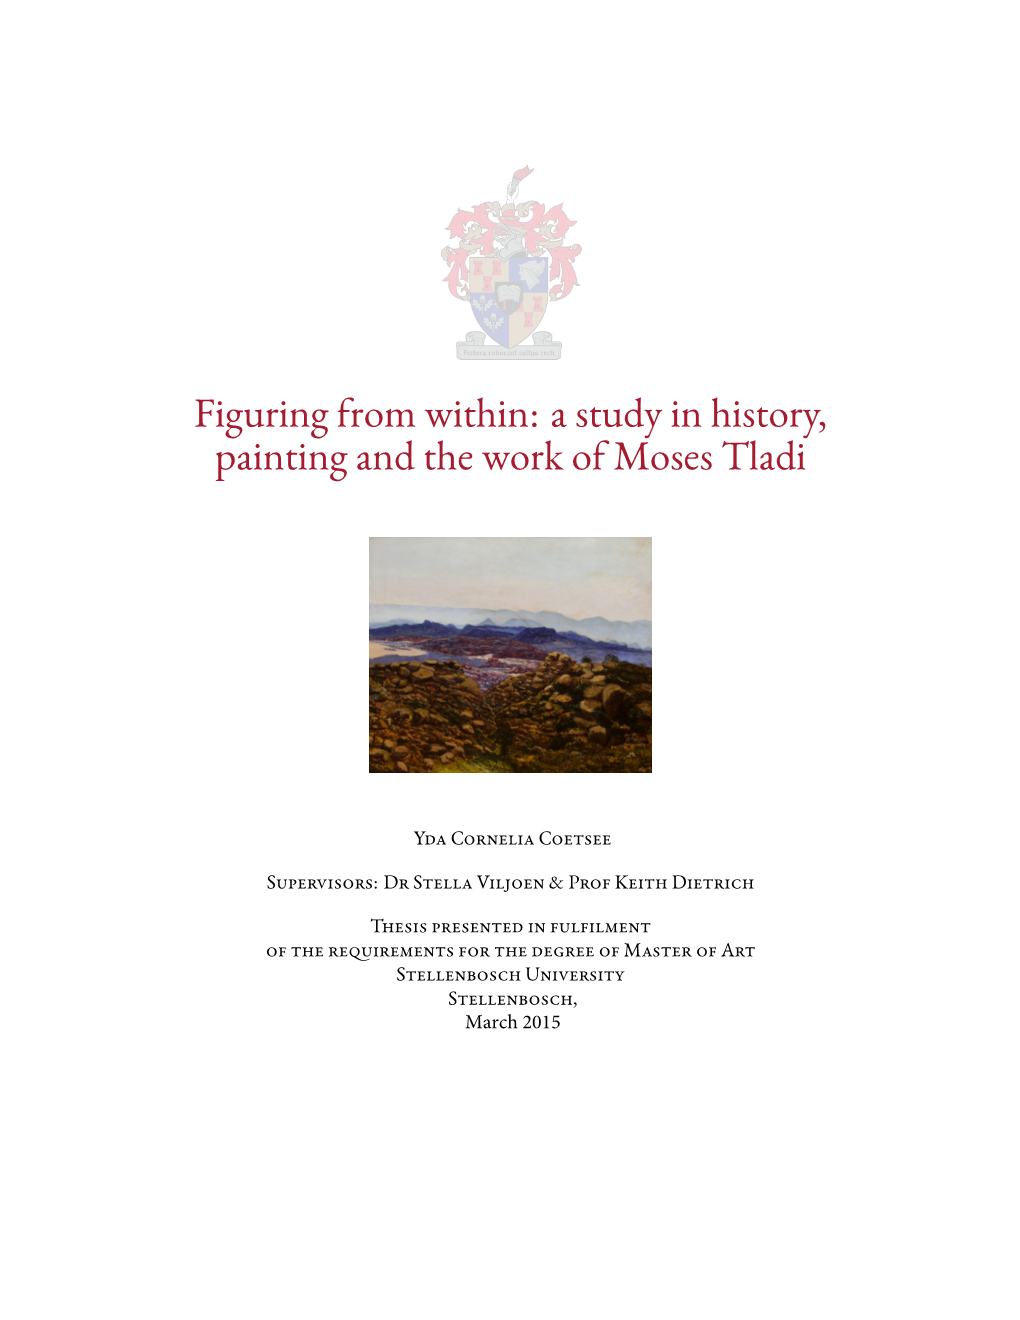 Figuring from Within: a Study in History, Painting and the Work of Moses Tladi